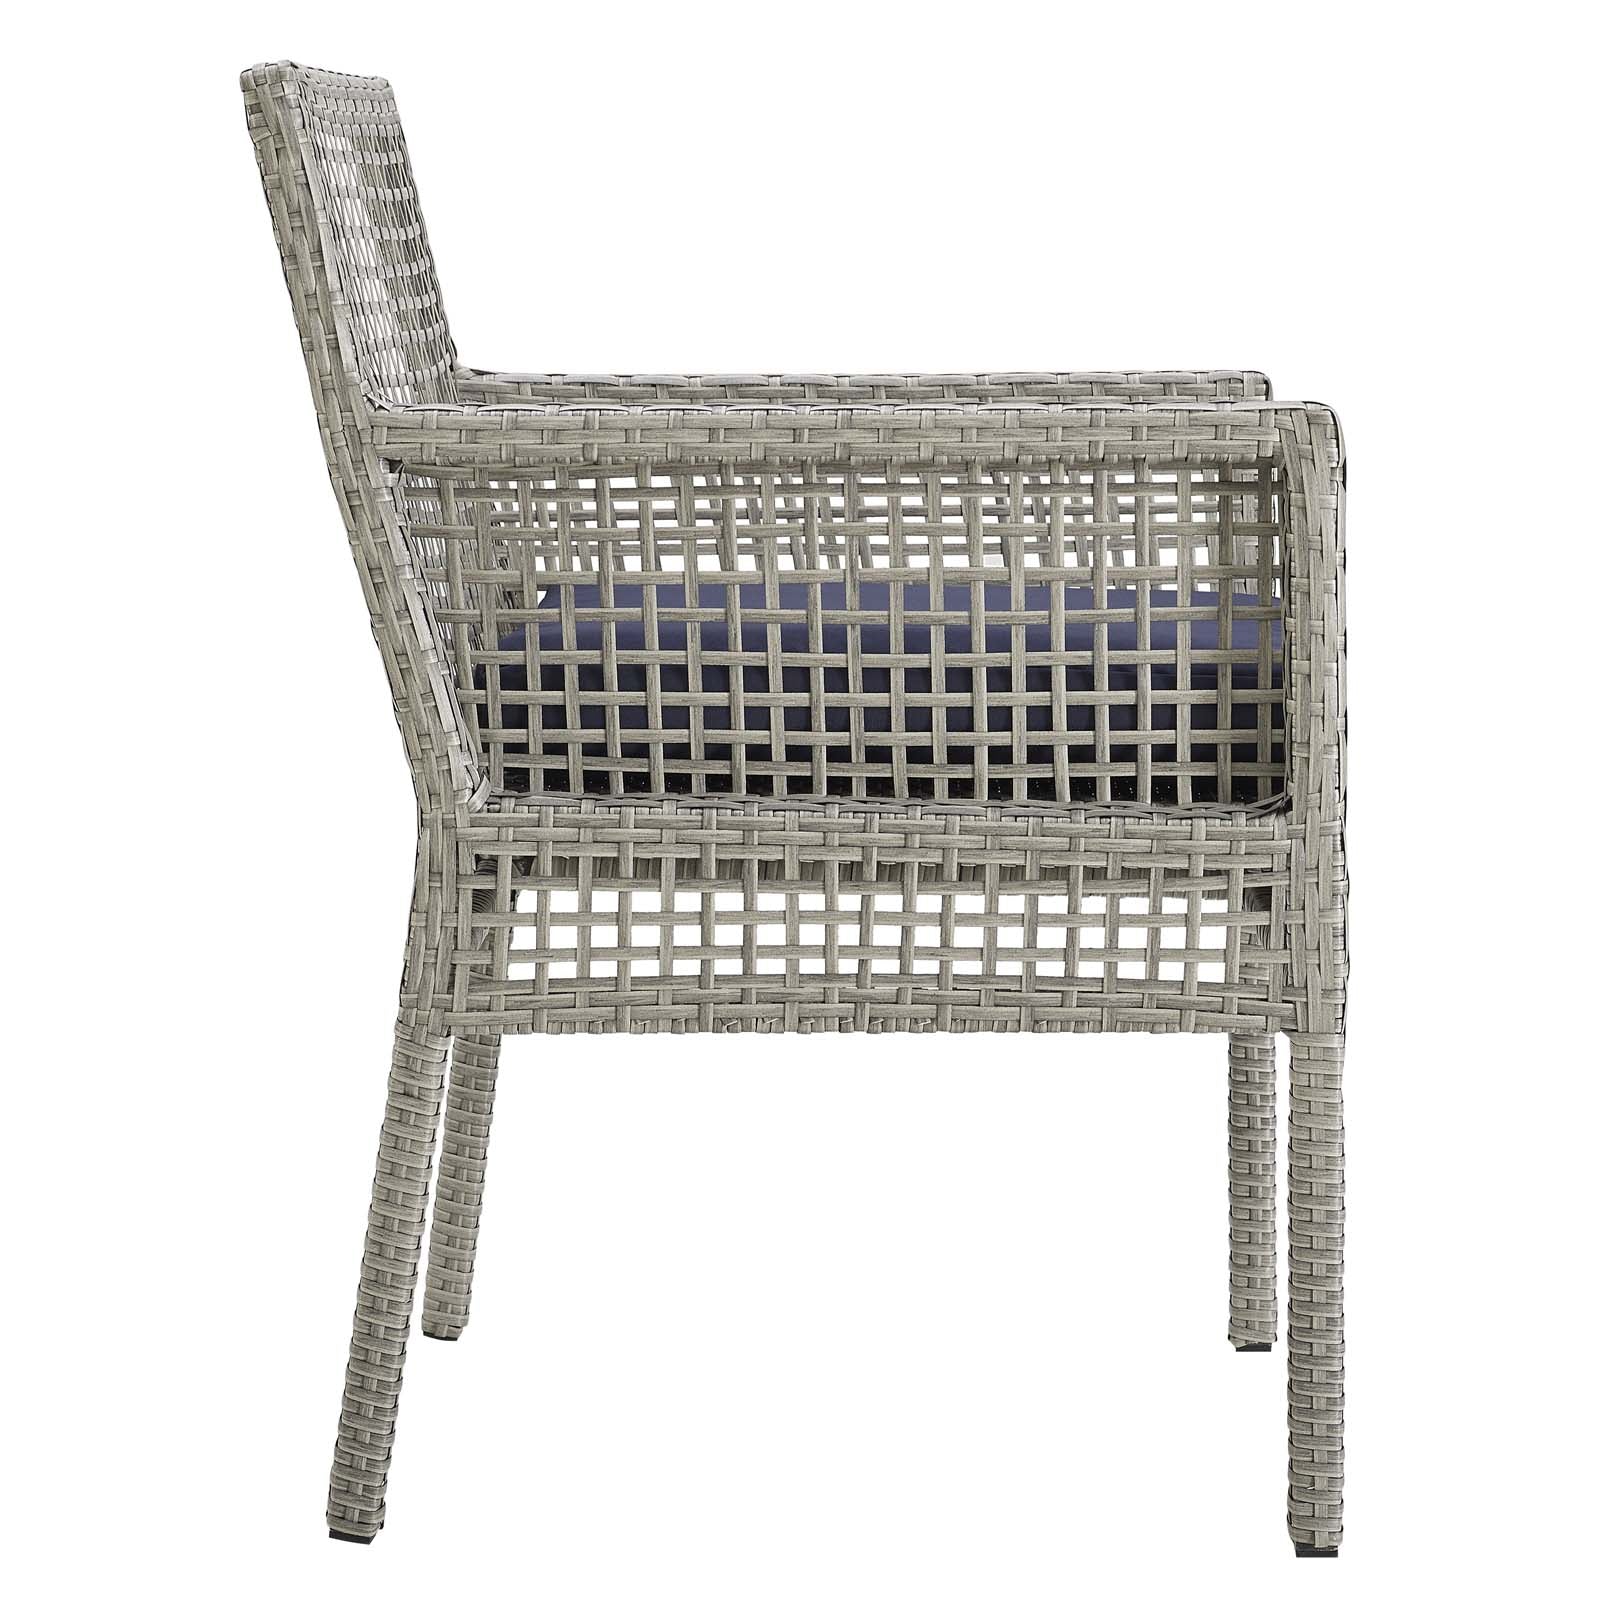 Modway Outdoor Dining Chairs - Aura Dining Armchair Outdoor Patio Wicker Rattan Set of 2 Gray Navy